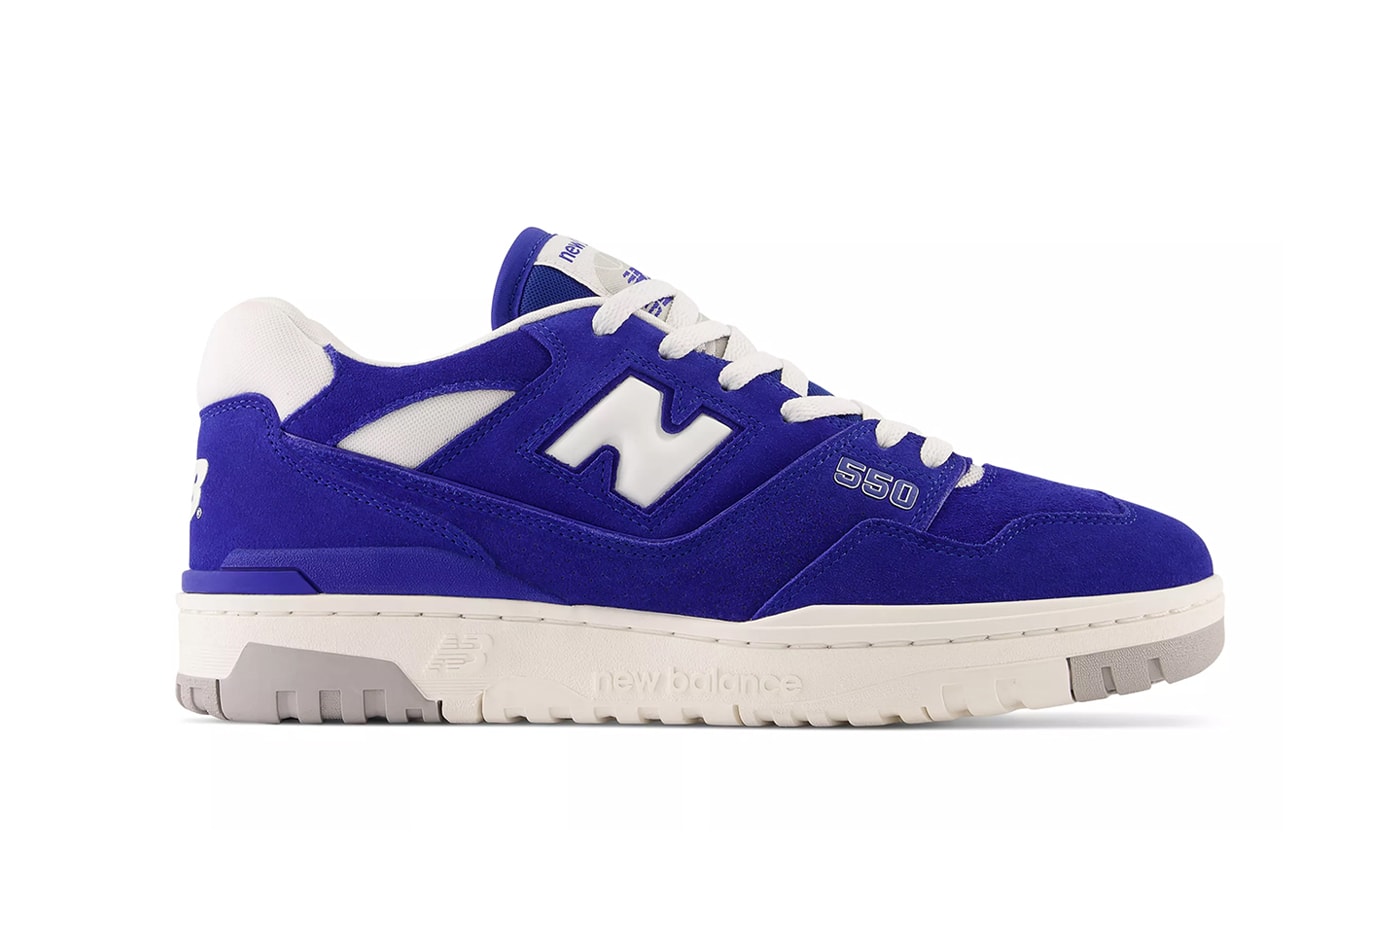 New Balance 550 Arrives in the USA-Inspired Tri-Color "Suede Pack" team red BB550VND concrete BB550VNB royal blue BB550VNA basketball low tops shoes sneakers nbs